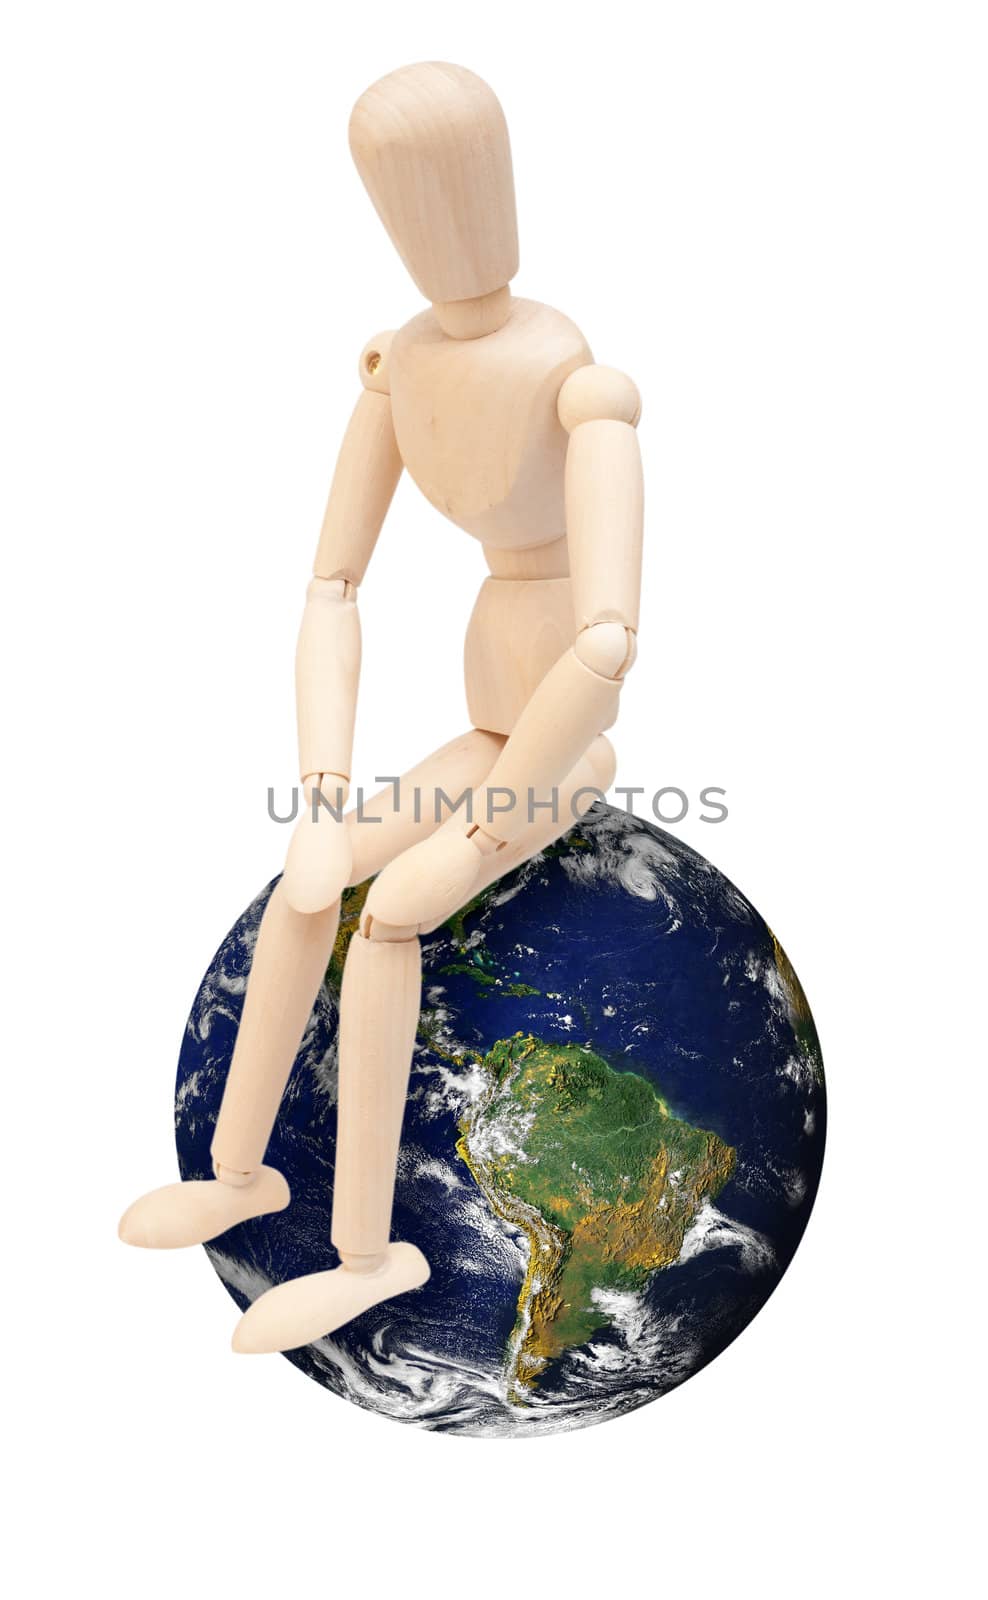 Wooden Puppet Sitting on Earth Globe - Isolated on White. Source image of Earth courtesy of NASA - terms of use: http://visibleearth.nasa.gov/useterms.php